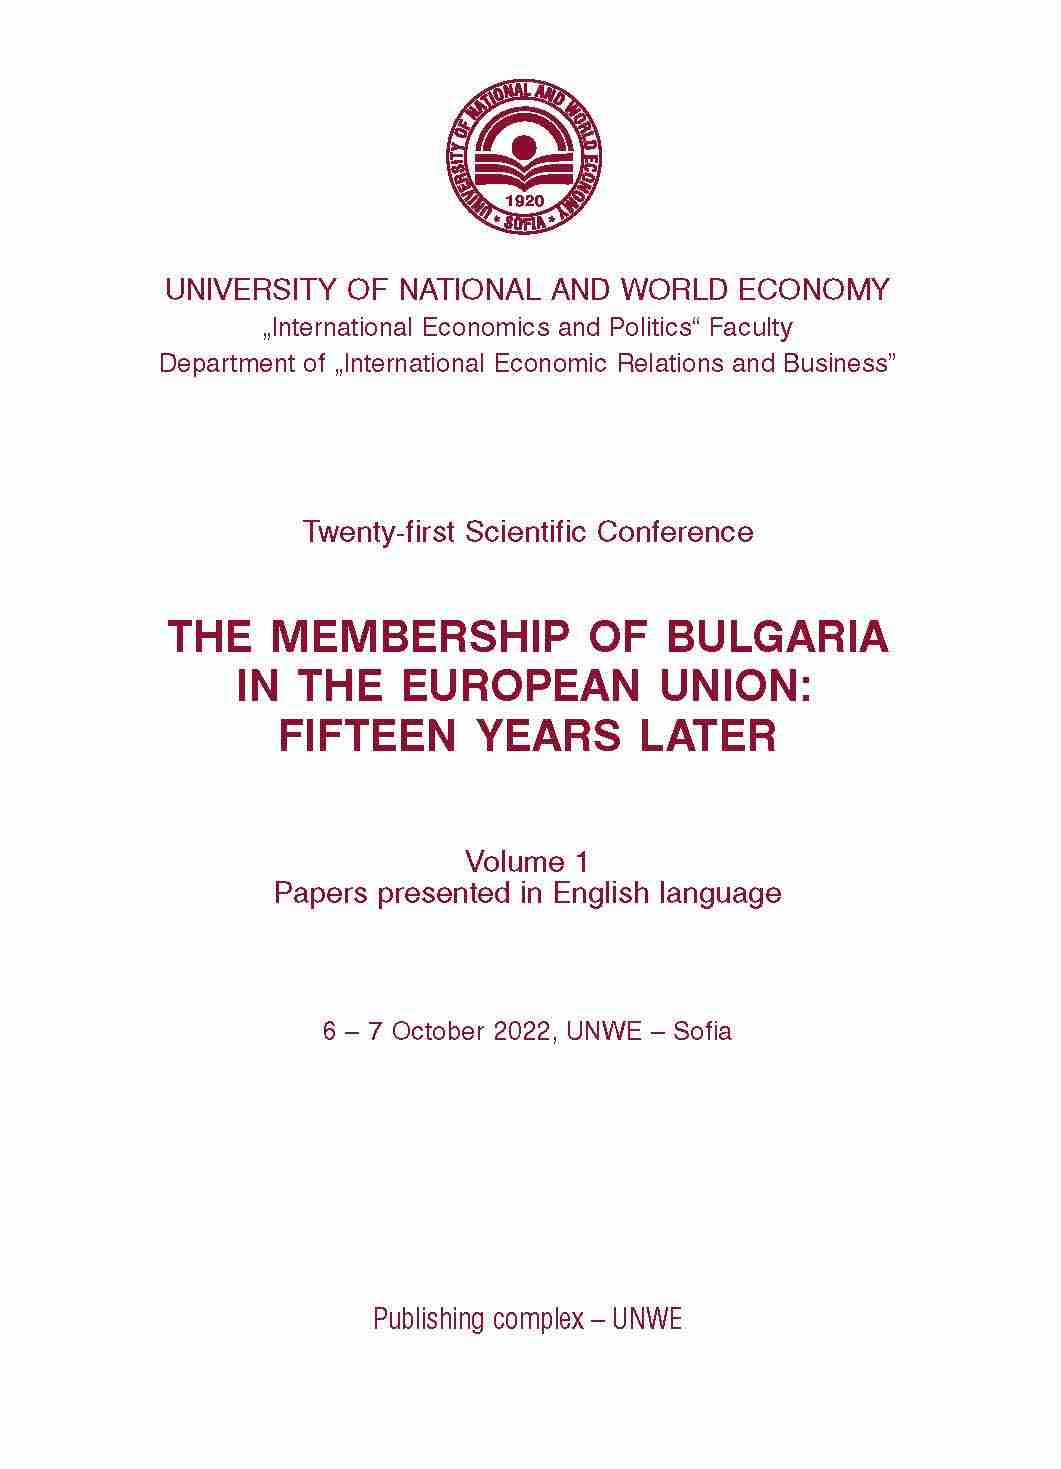 The Membership of Bulgaria in the European Union: Fifteen Years Later: Twenty-First Scientific Conference Cover Image